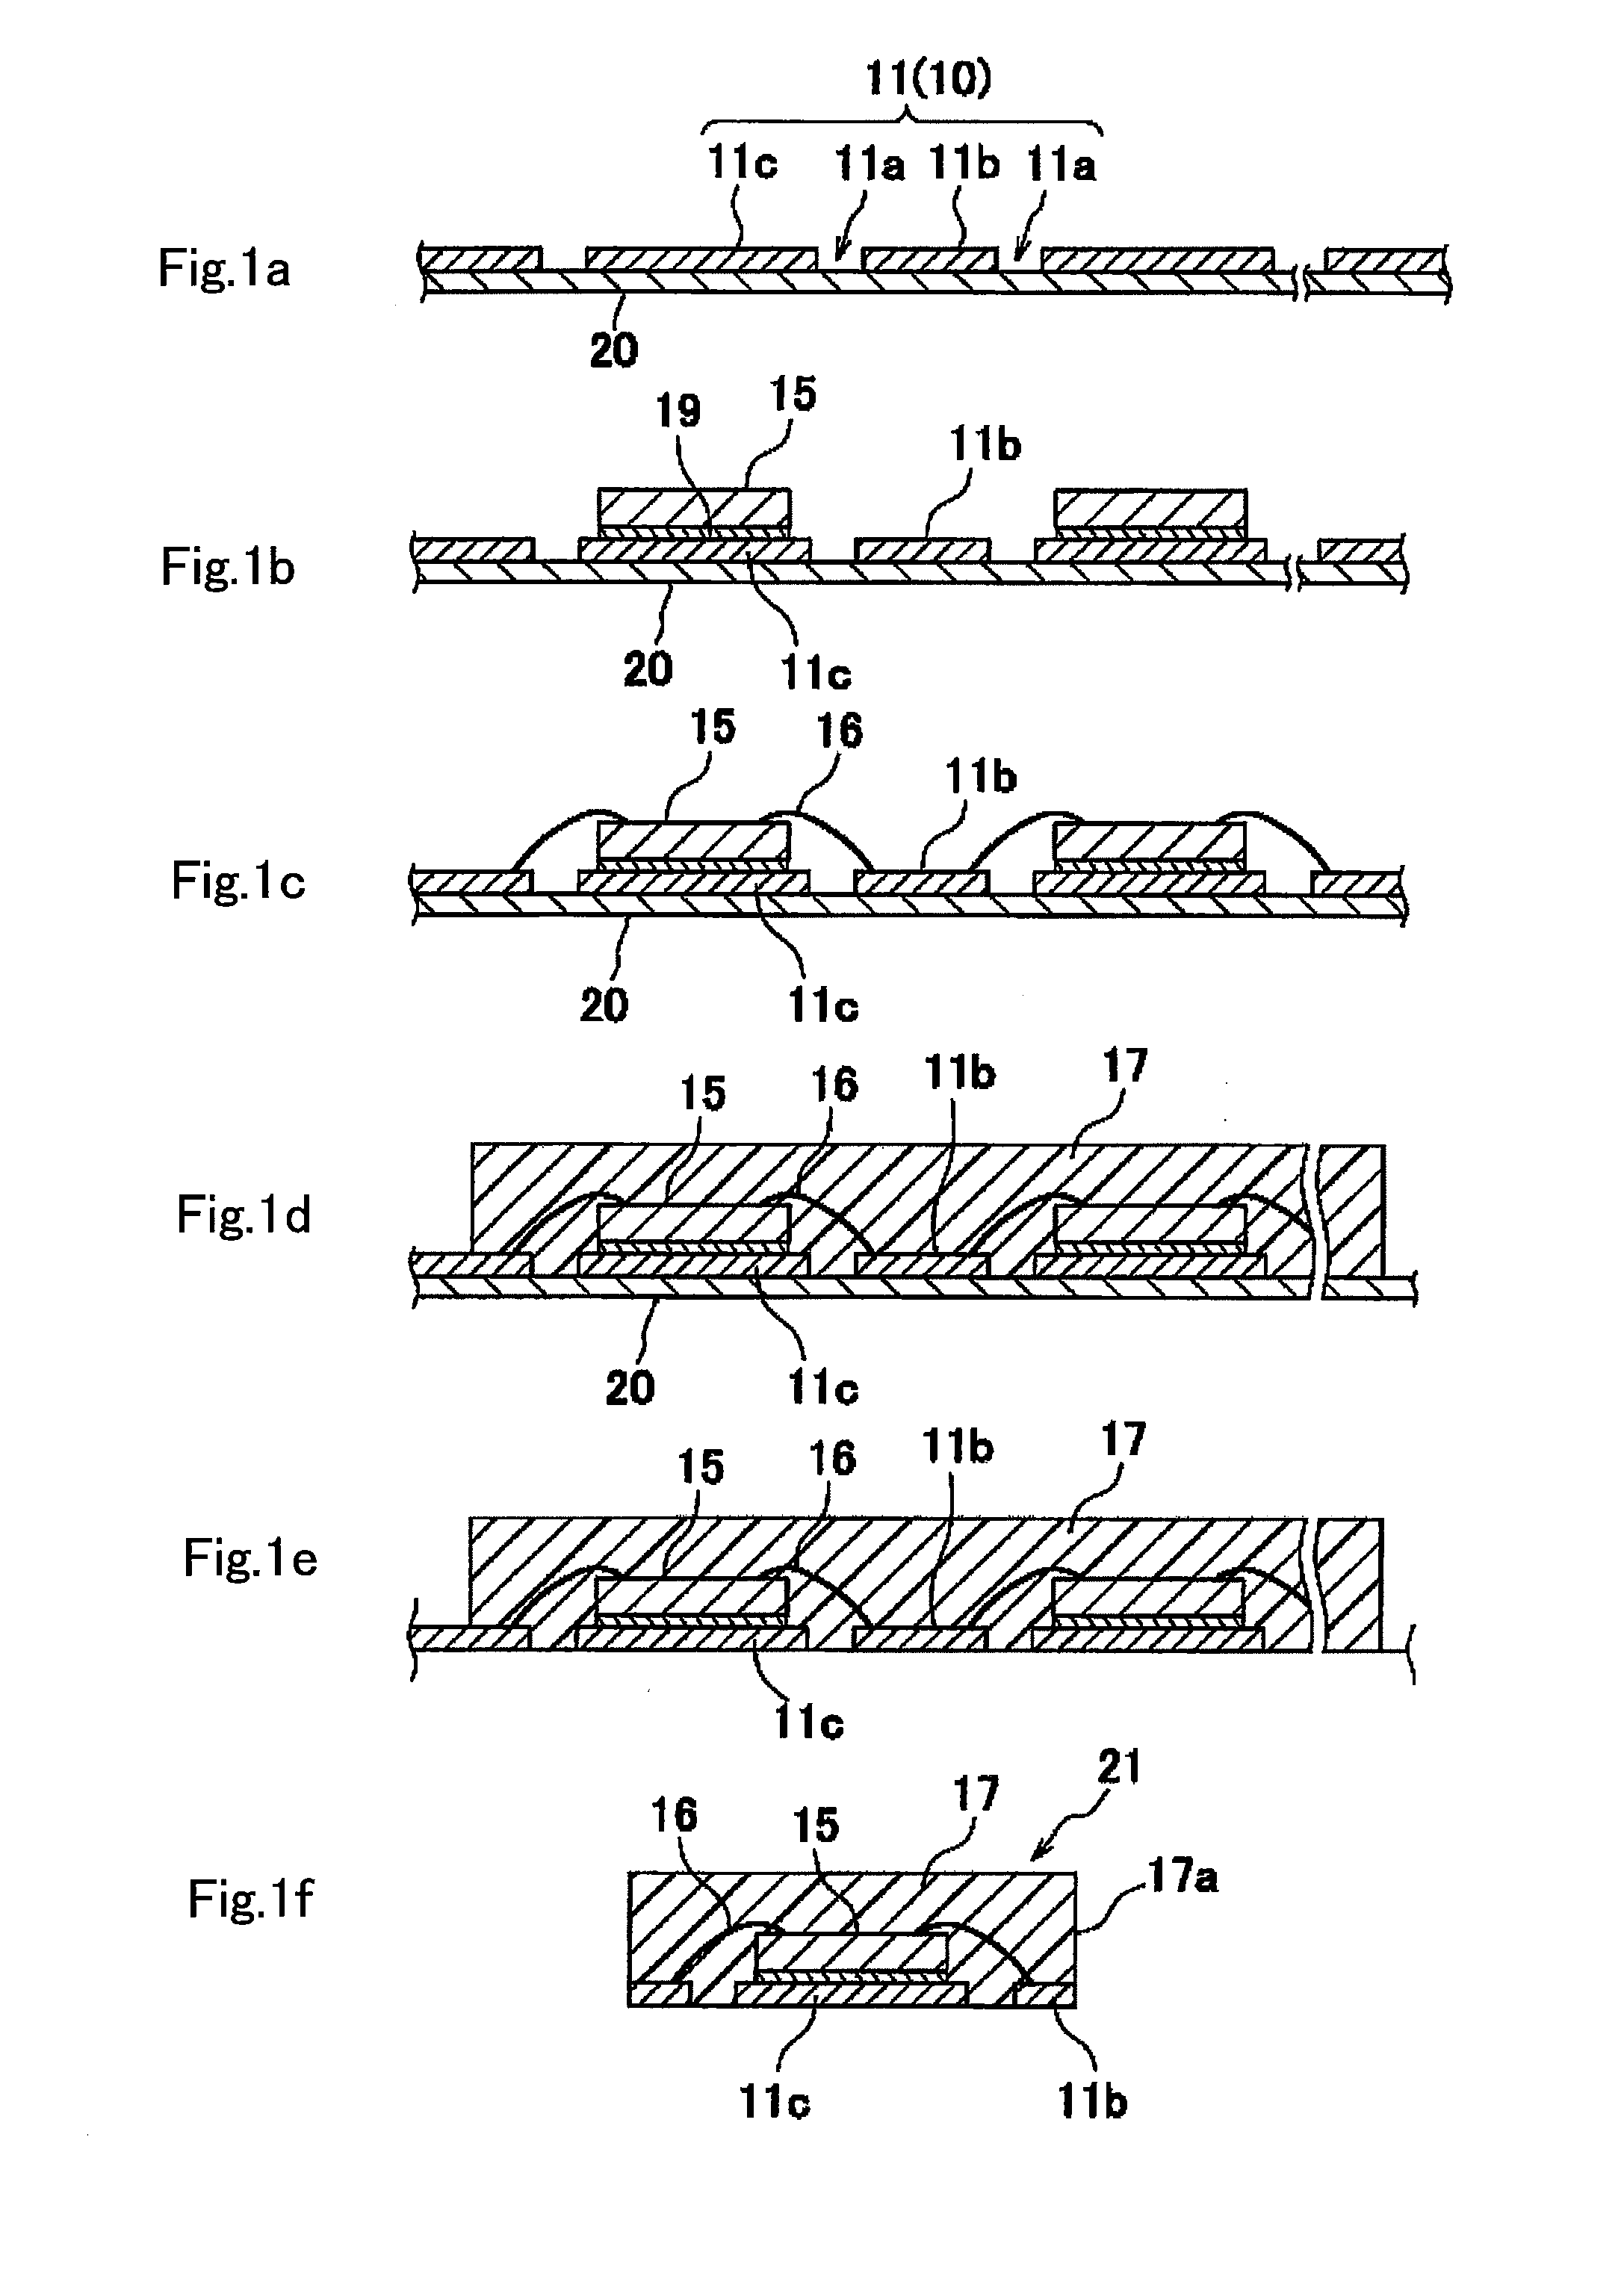 Adhesive tape for resin-encapsulating and method of manufacture of resin-encapsulated semiconductor device